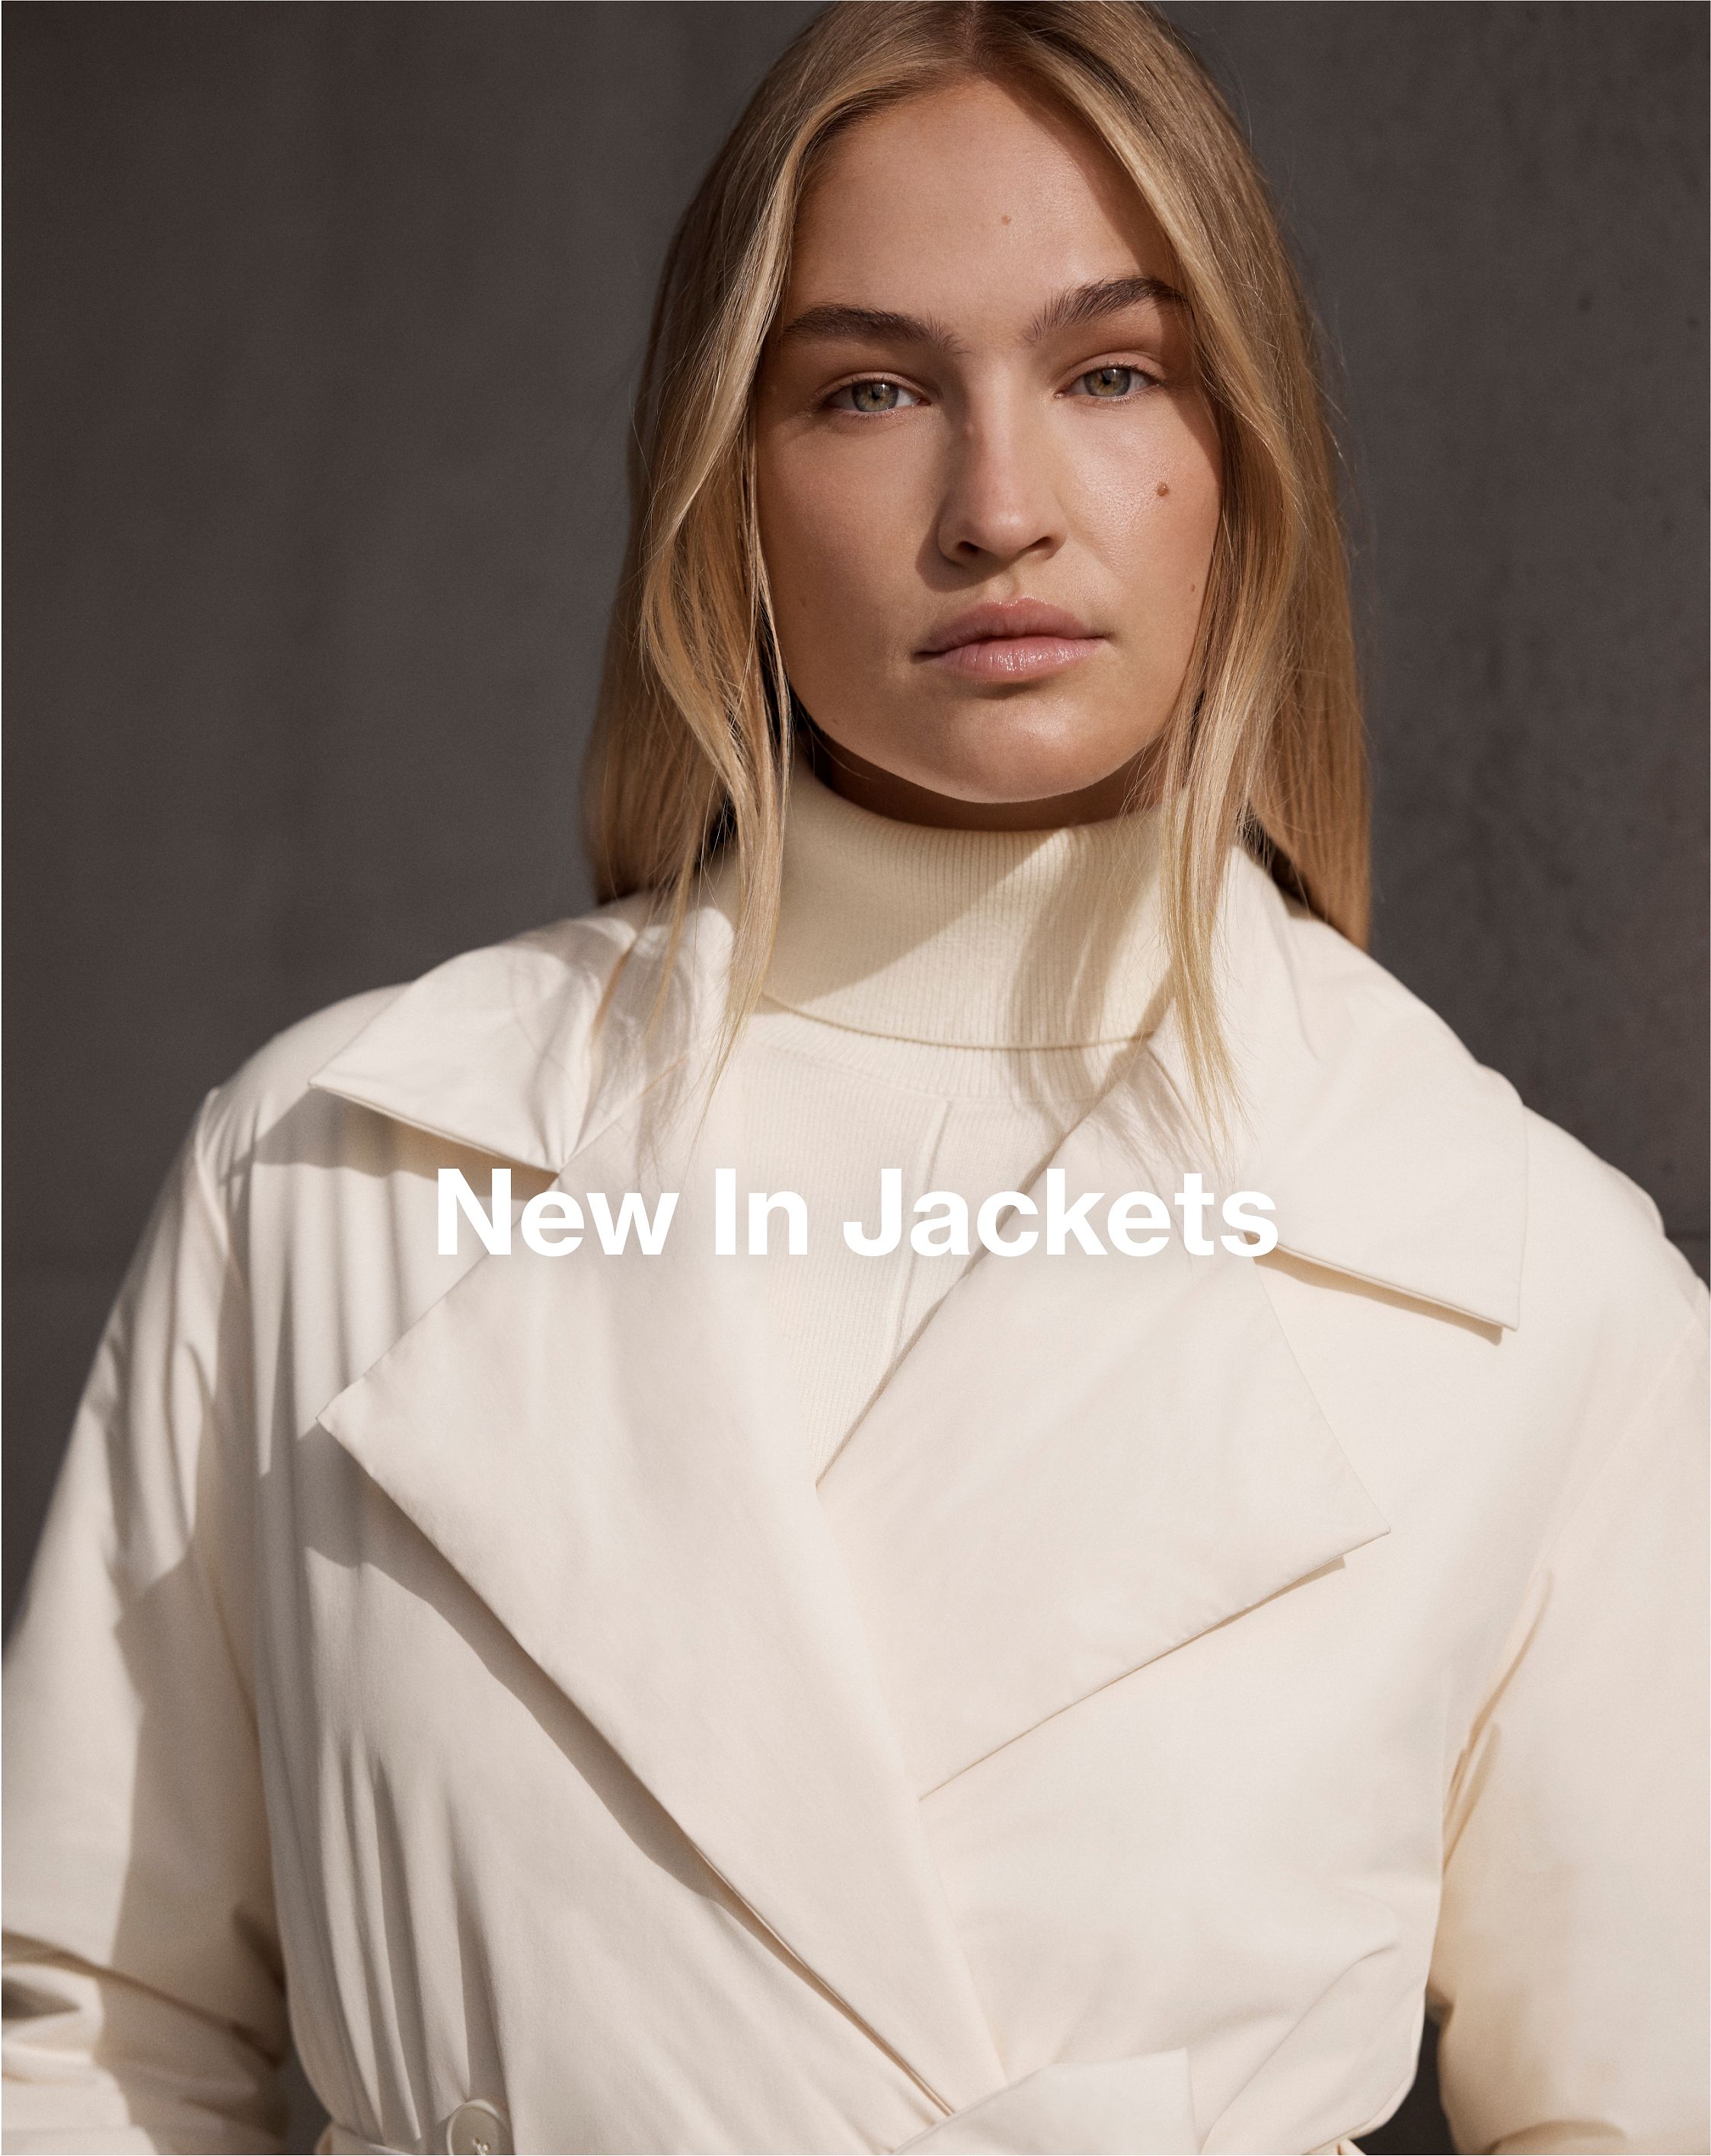 New in Jackets